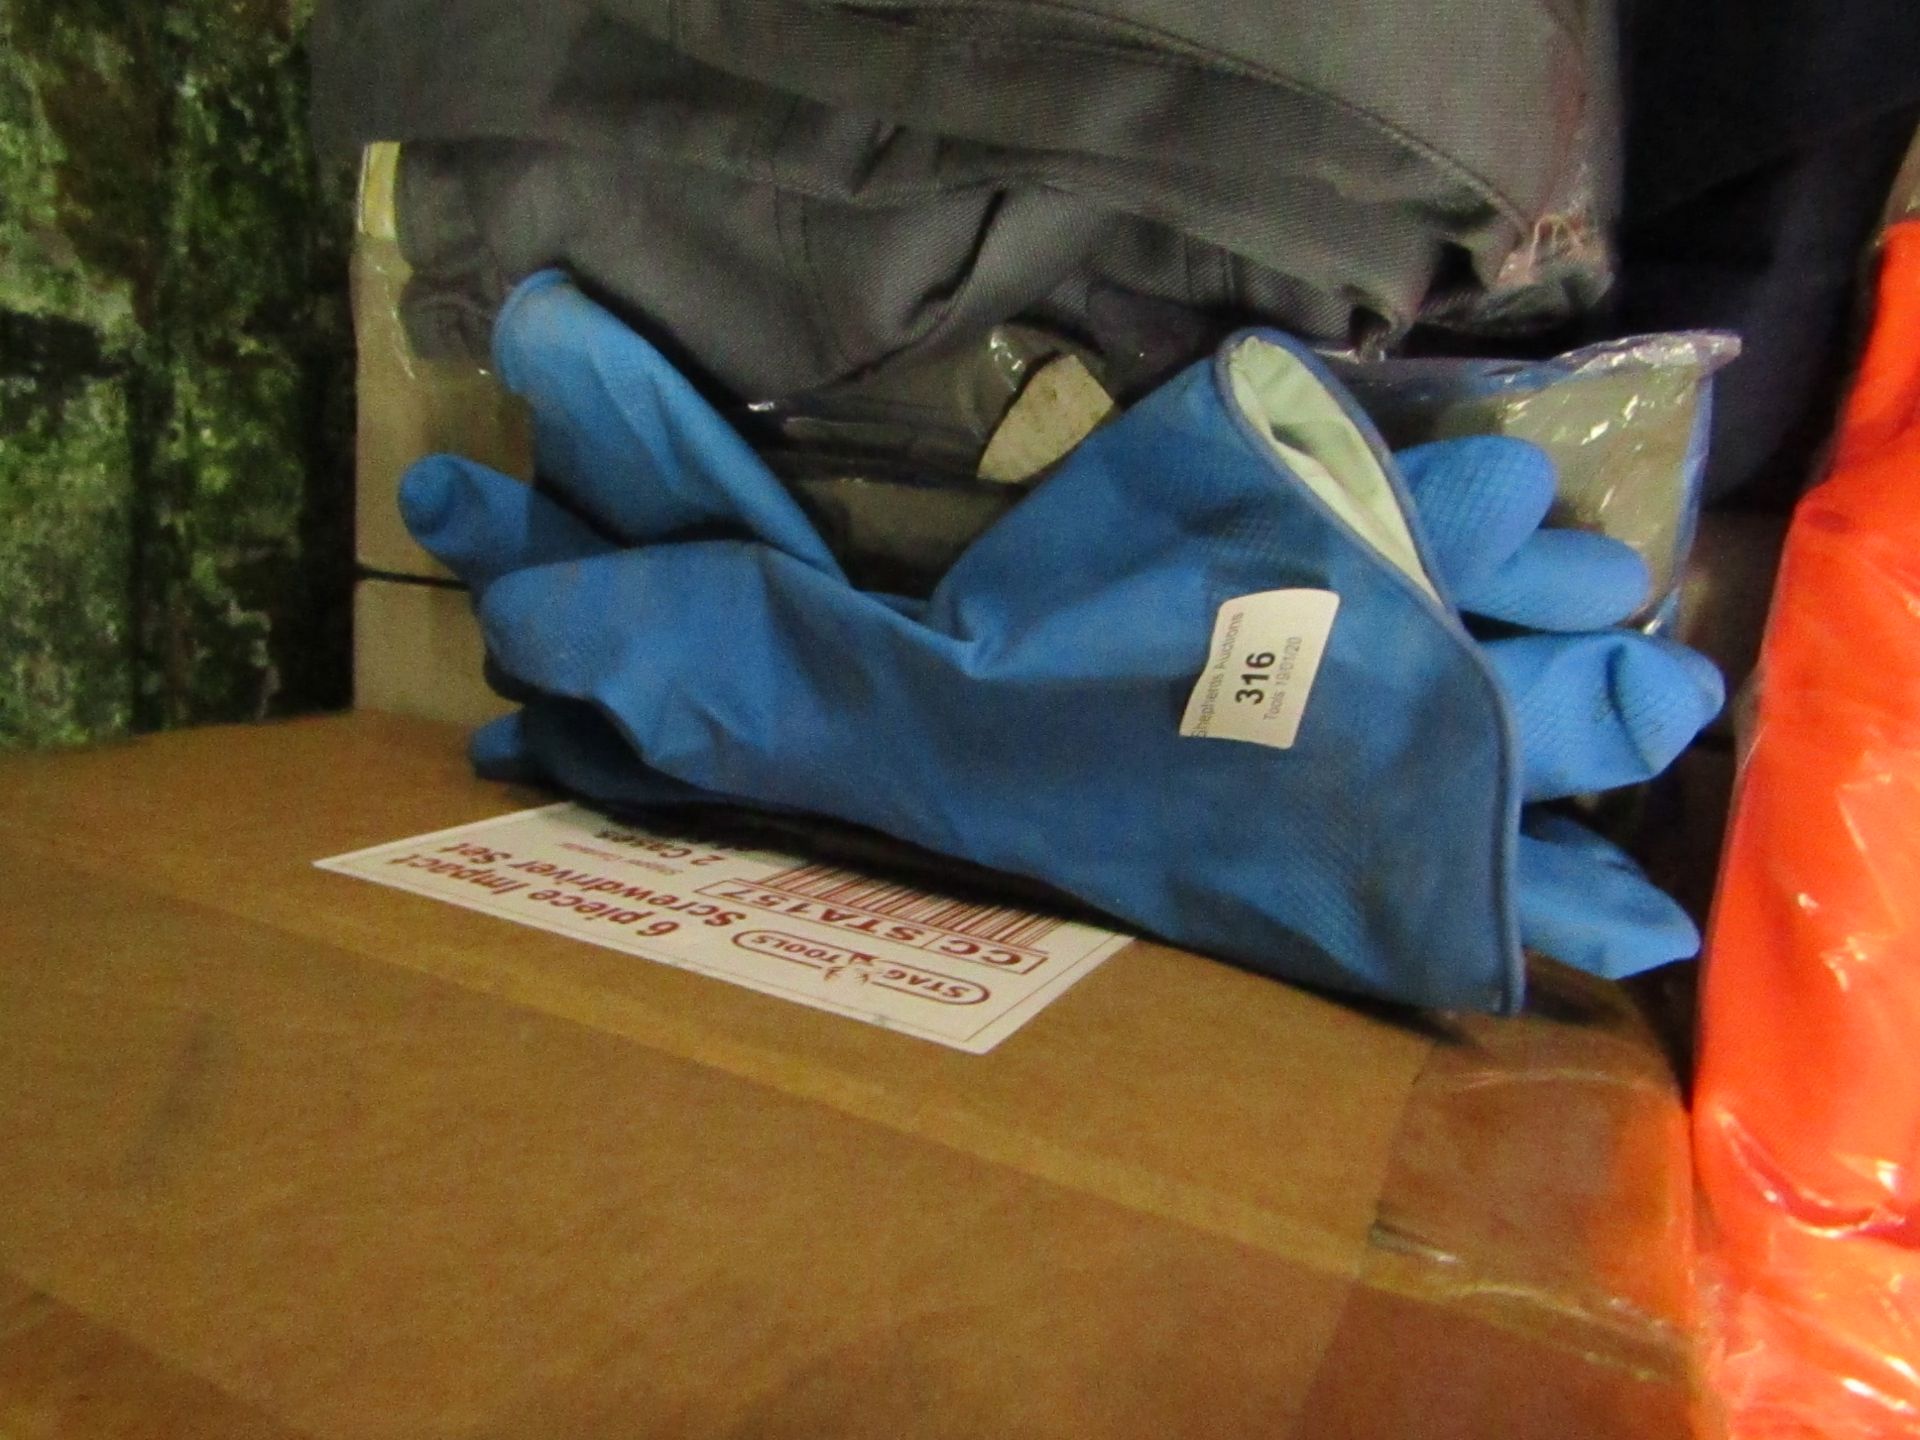 4x Pairs of vinyl gloves, new and packaged.